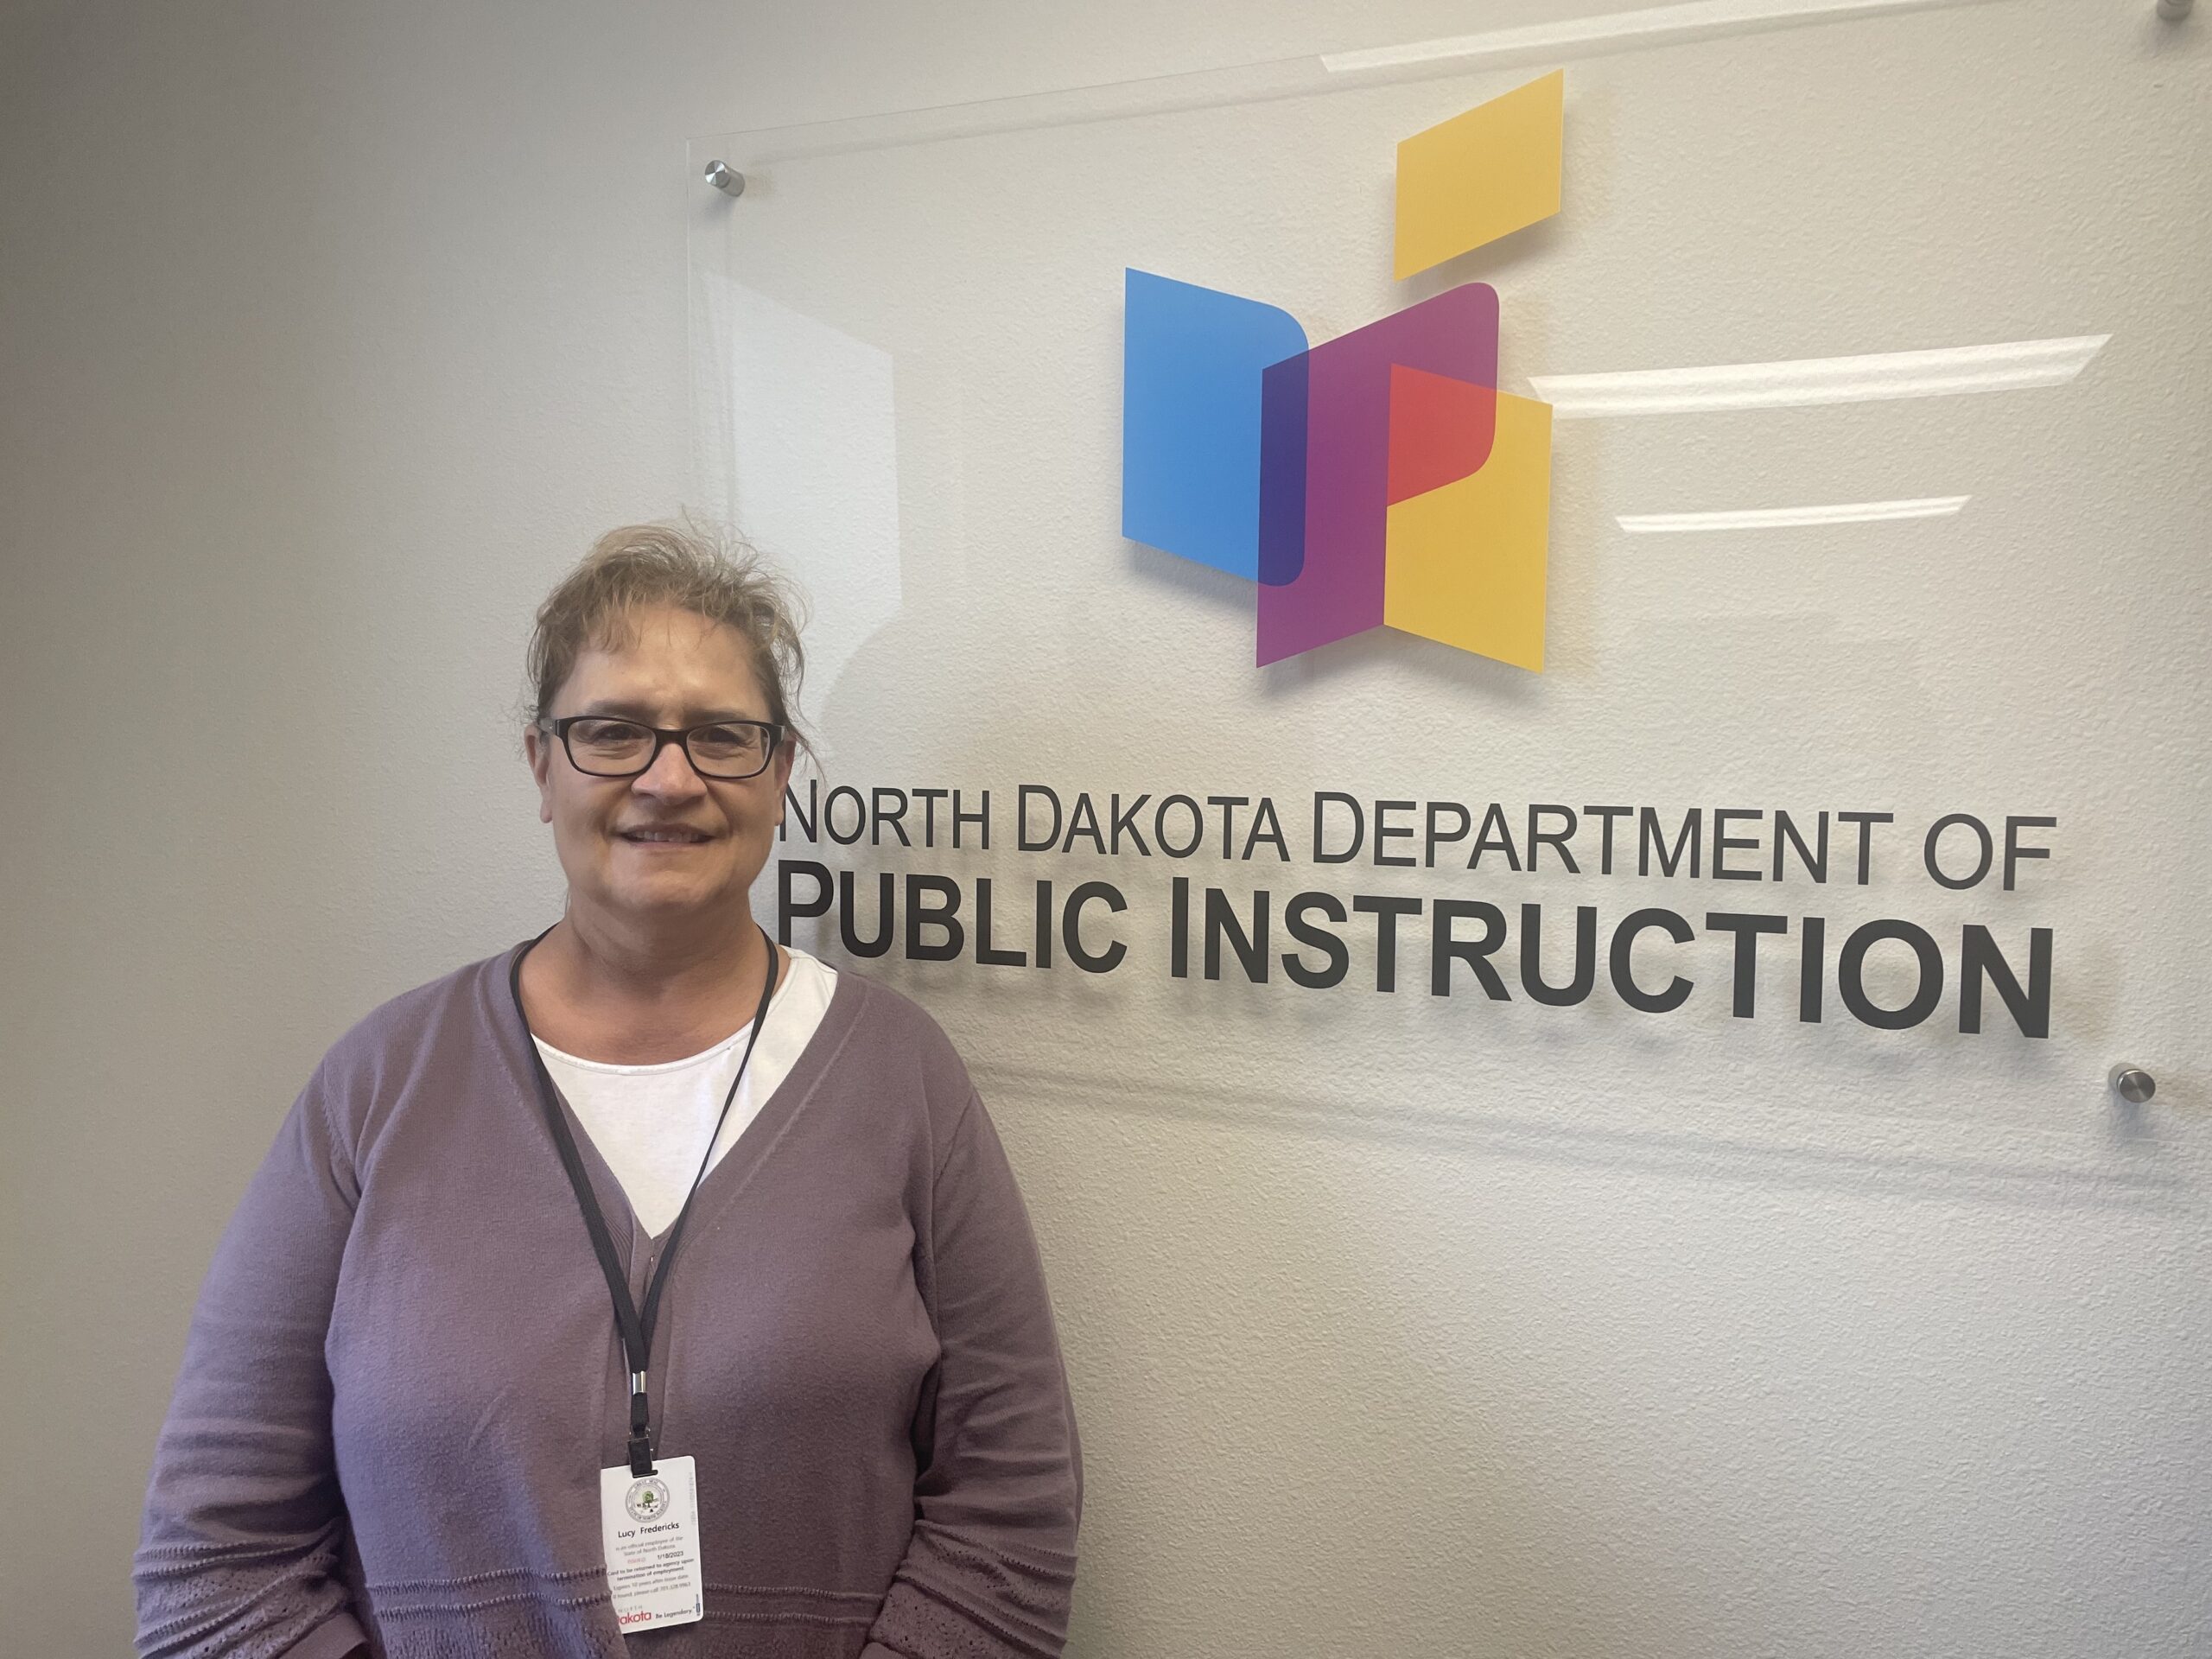 Lucy Fredericks, director of Indian and Multicultural Education for North Dakota, collaborates with different offices to meet North Dakota's Native students' needs. Photo by Adrianna Adame